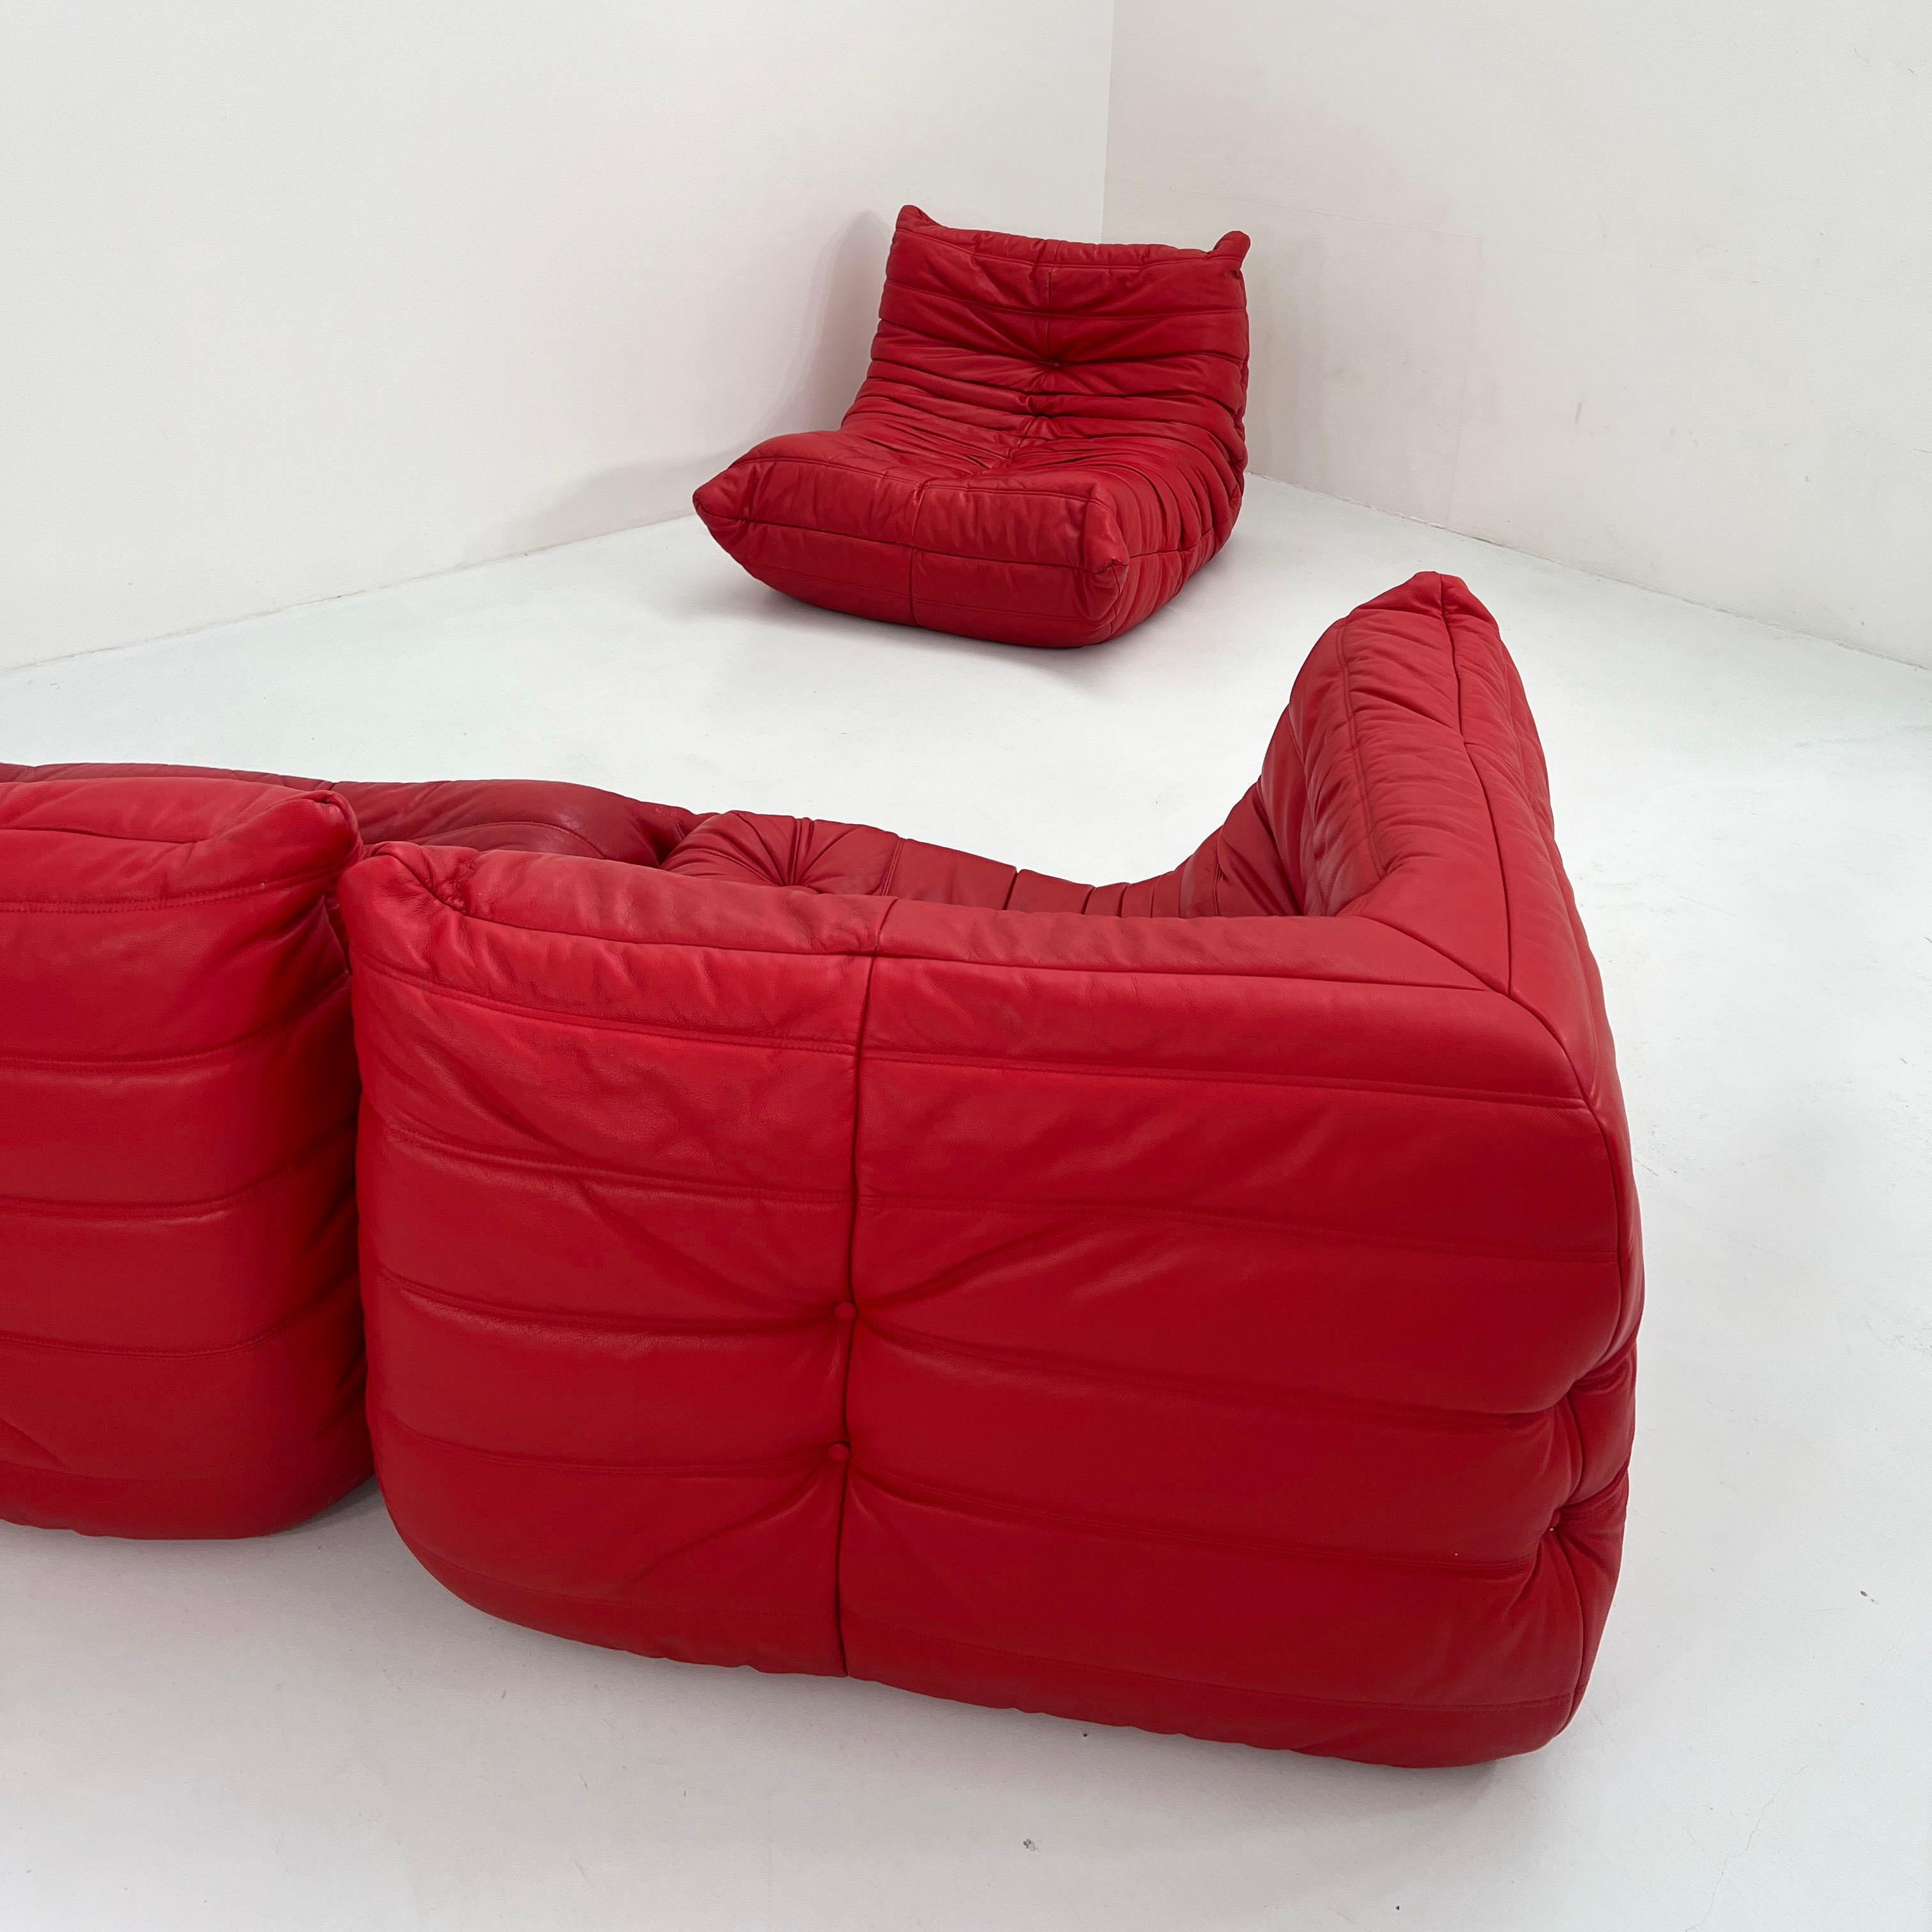 Togo Sofa Set in Red Leather by Michel Ducaroy for Ligne Roset, 1970s For Sale 10